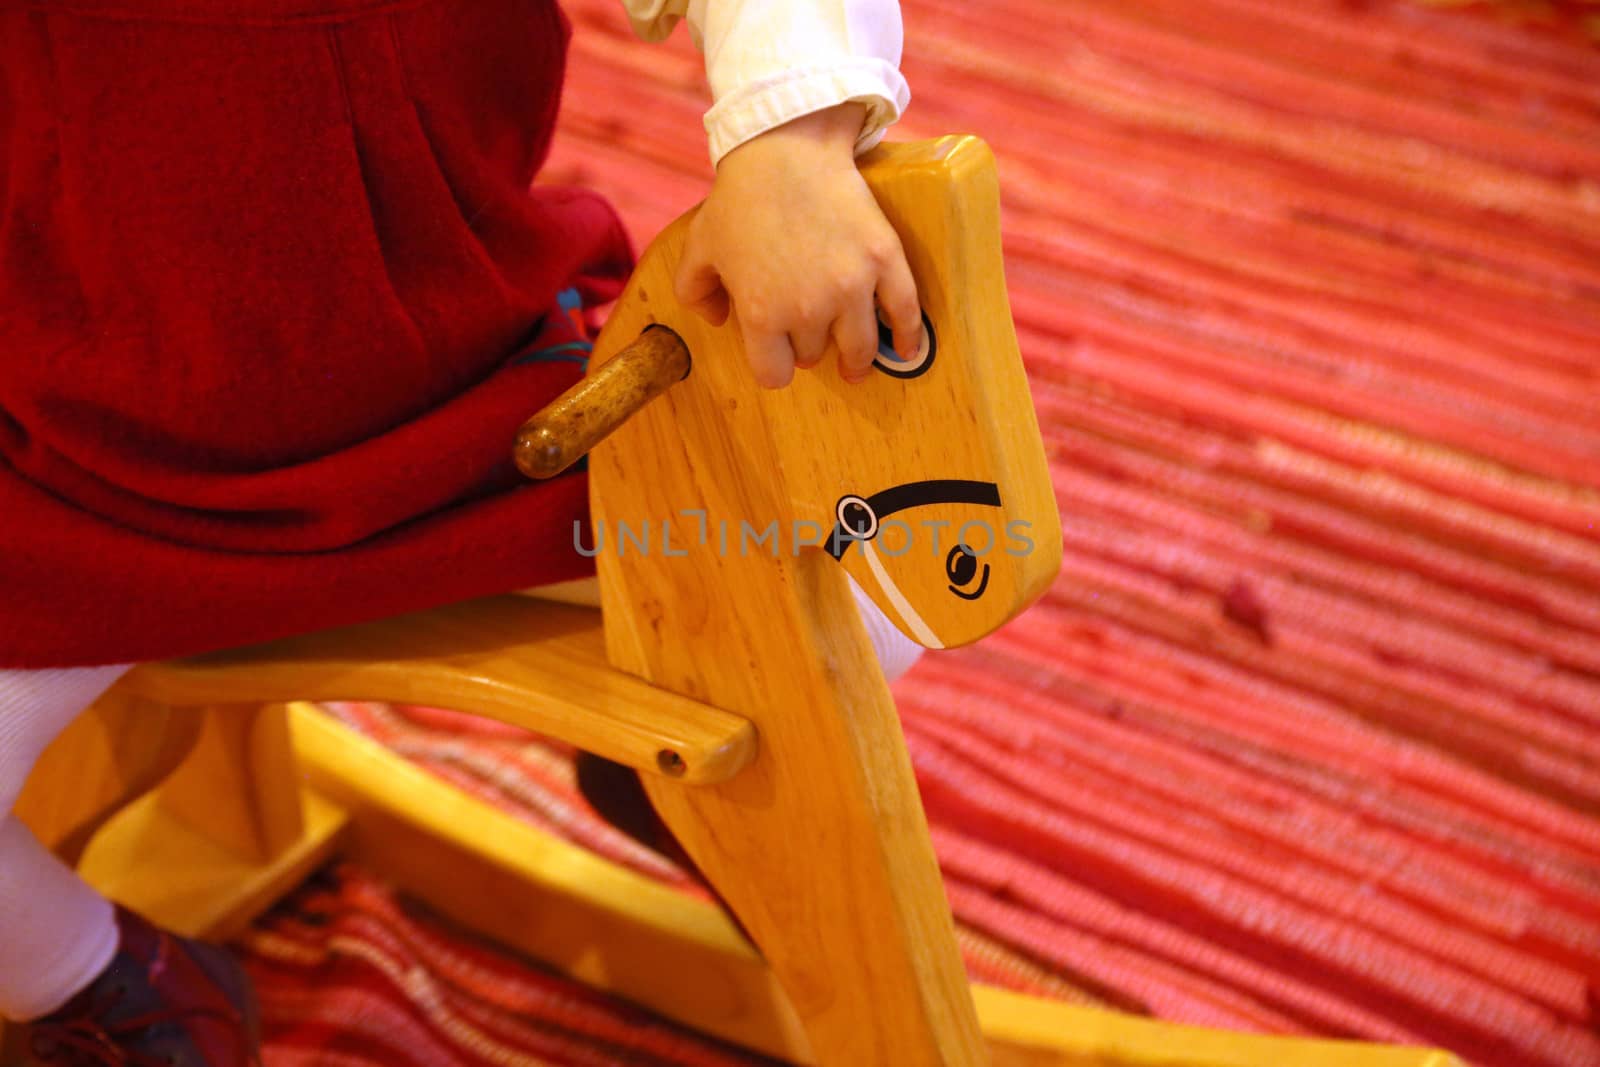 A small girl dressed in red is riding a wooden horse.